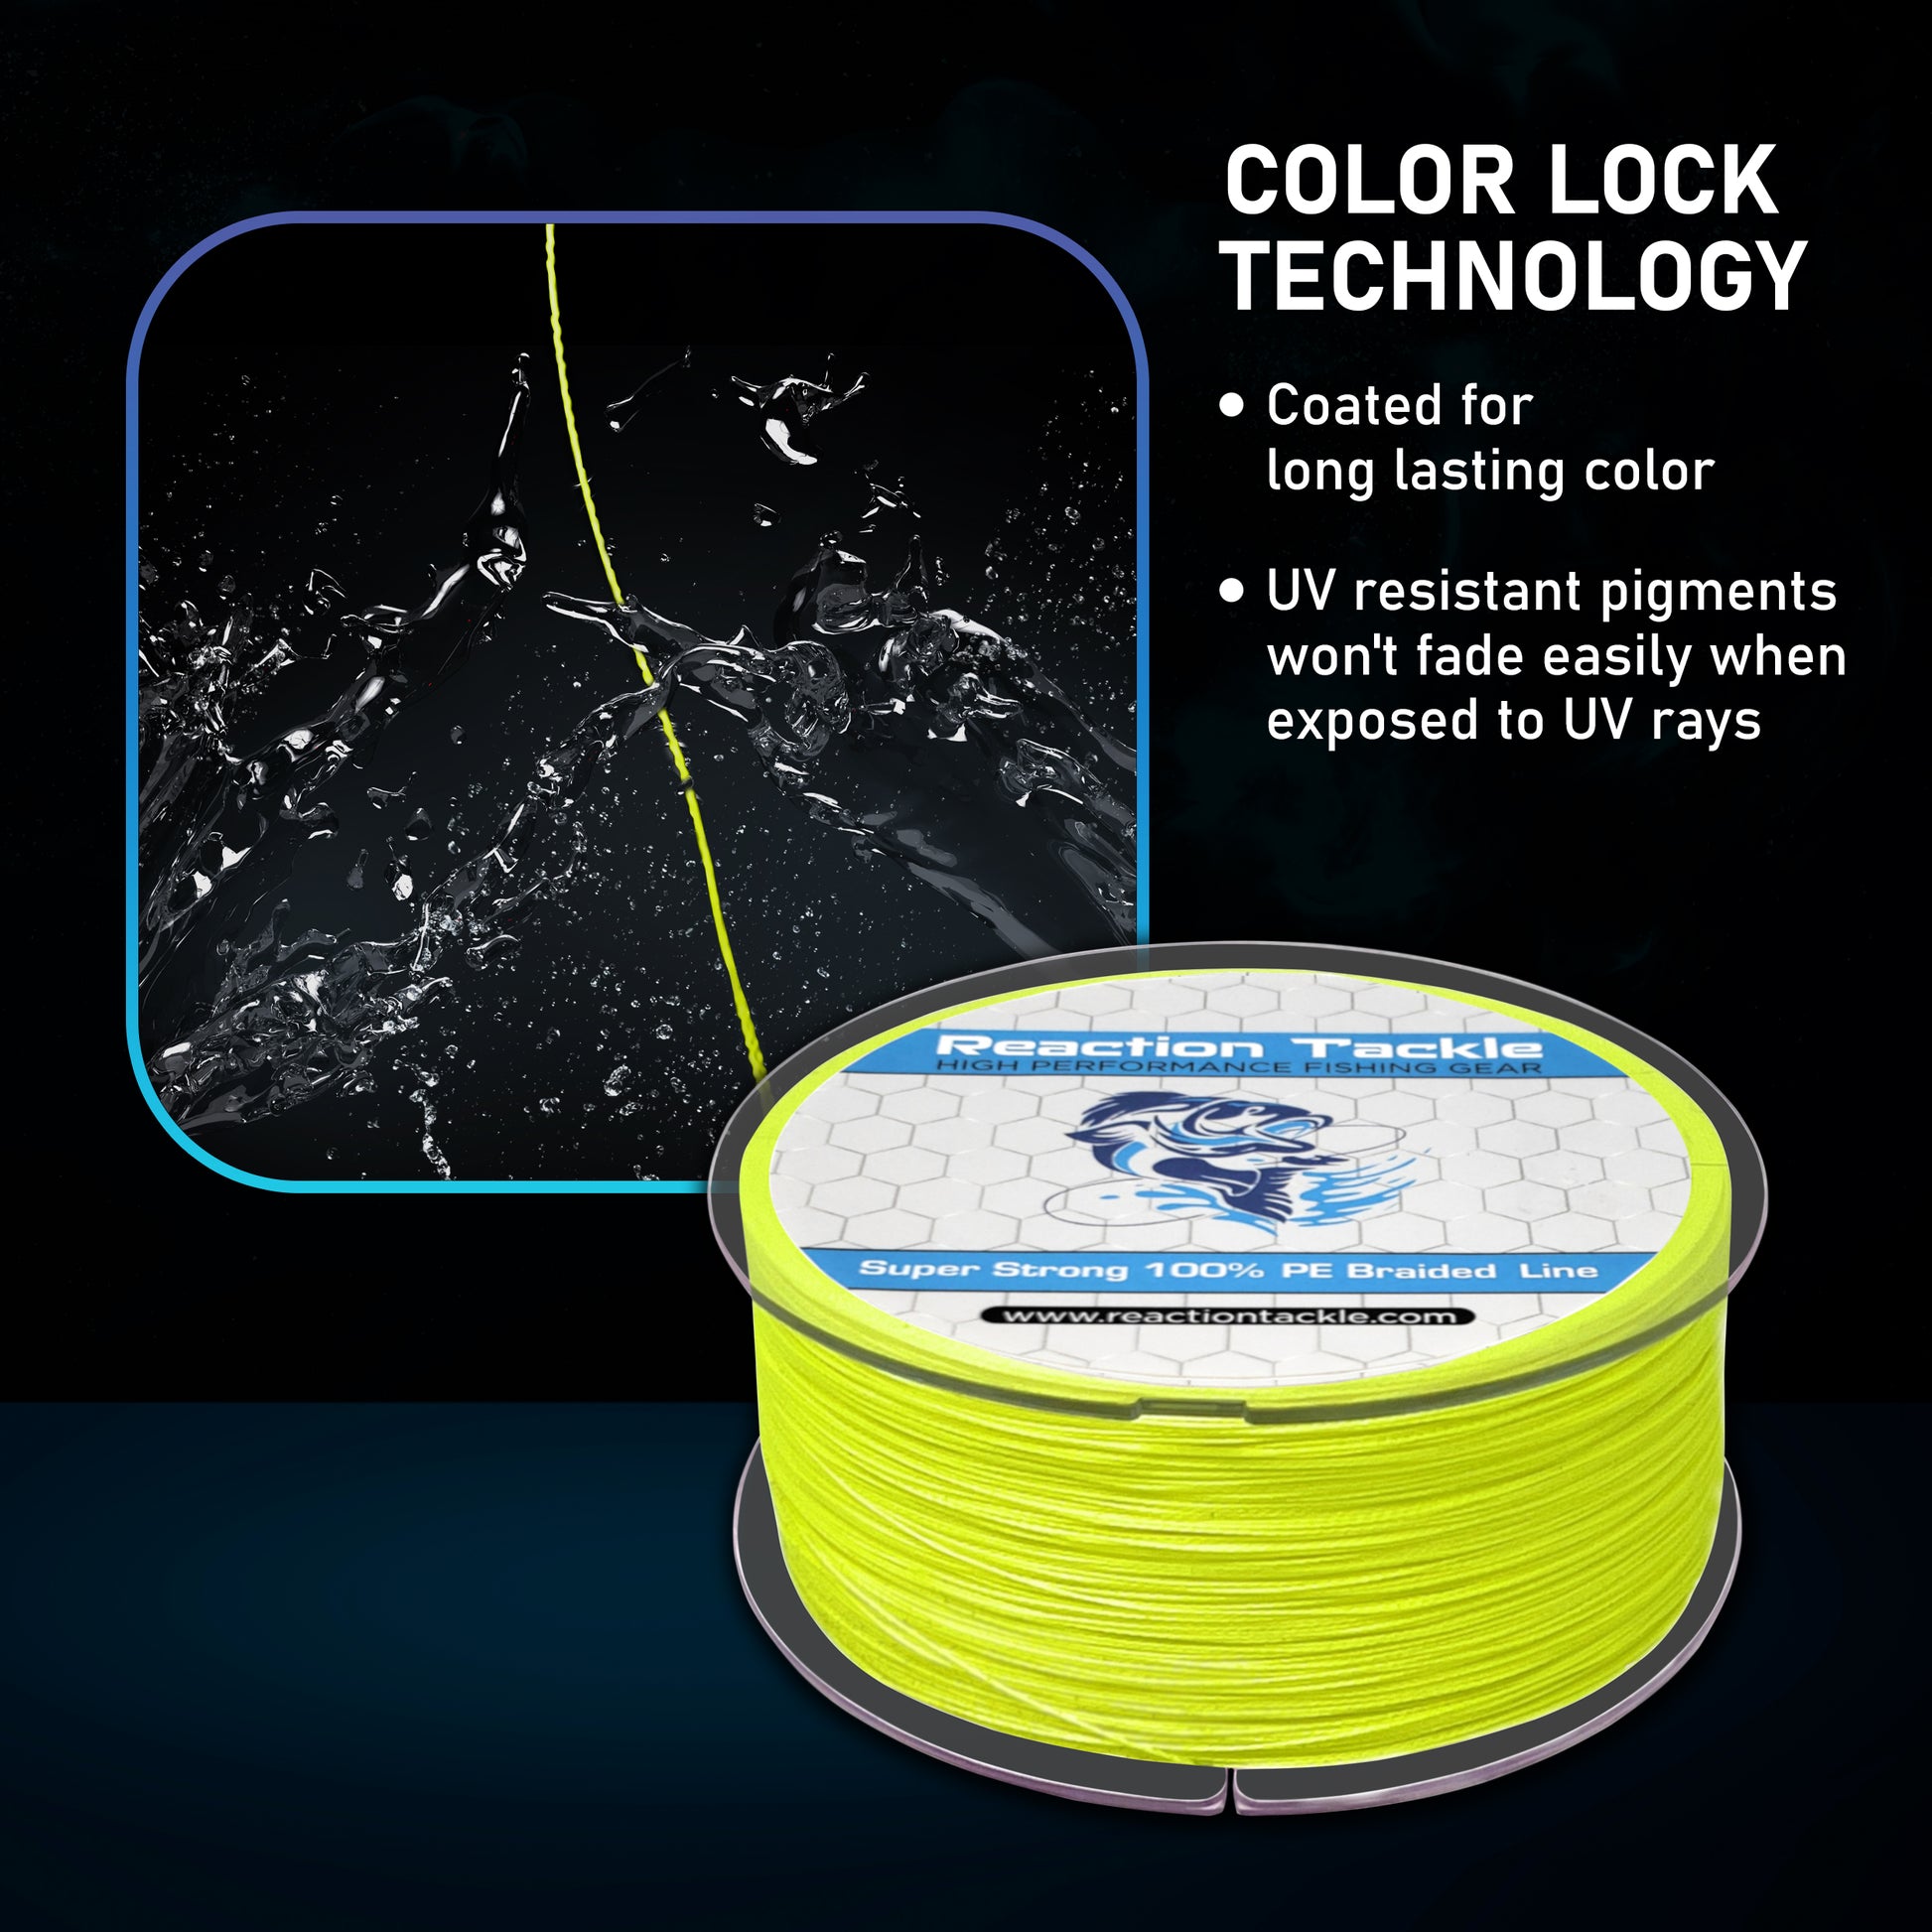 Reaction Tackle Braided Fishing Line Gray 10lb 300yd